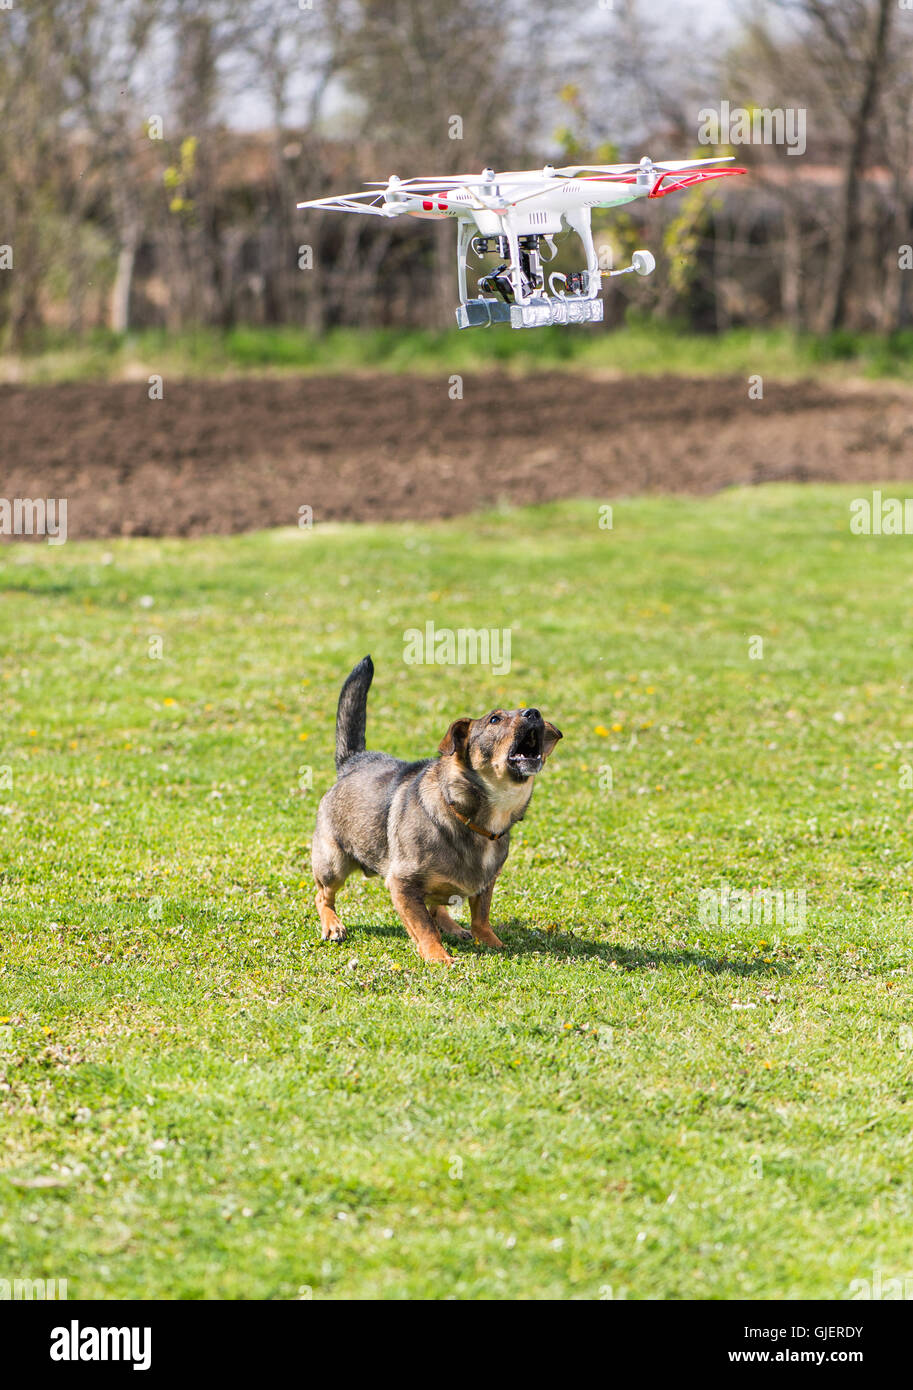 flying drone with camera and dog Stock Photo - Alamy